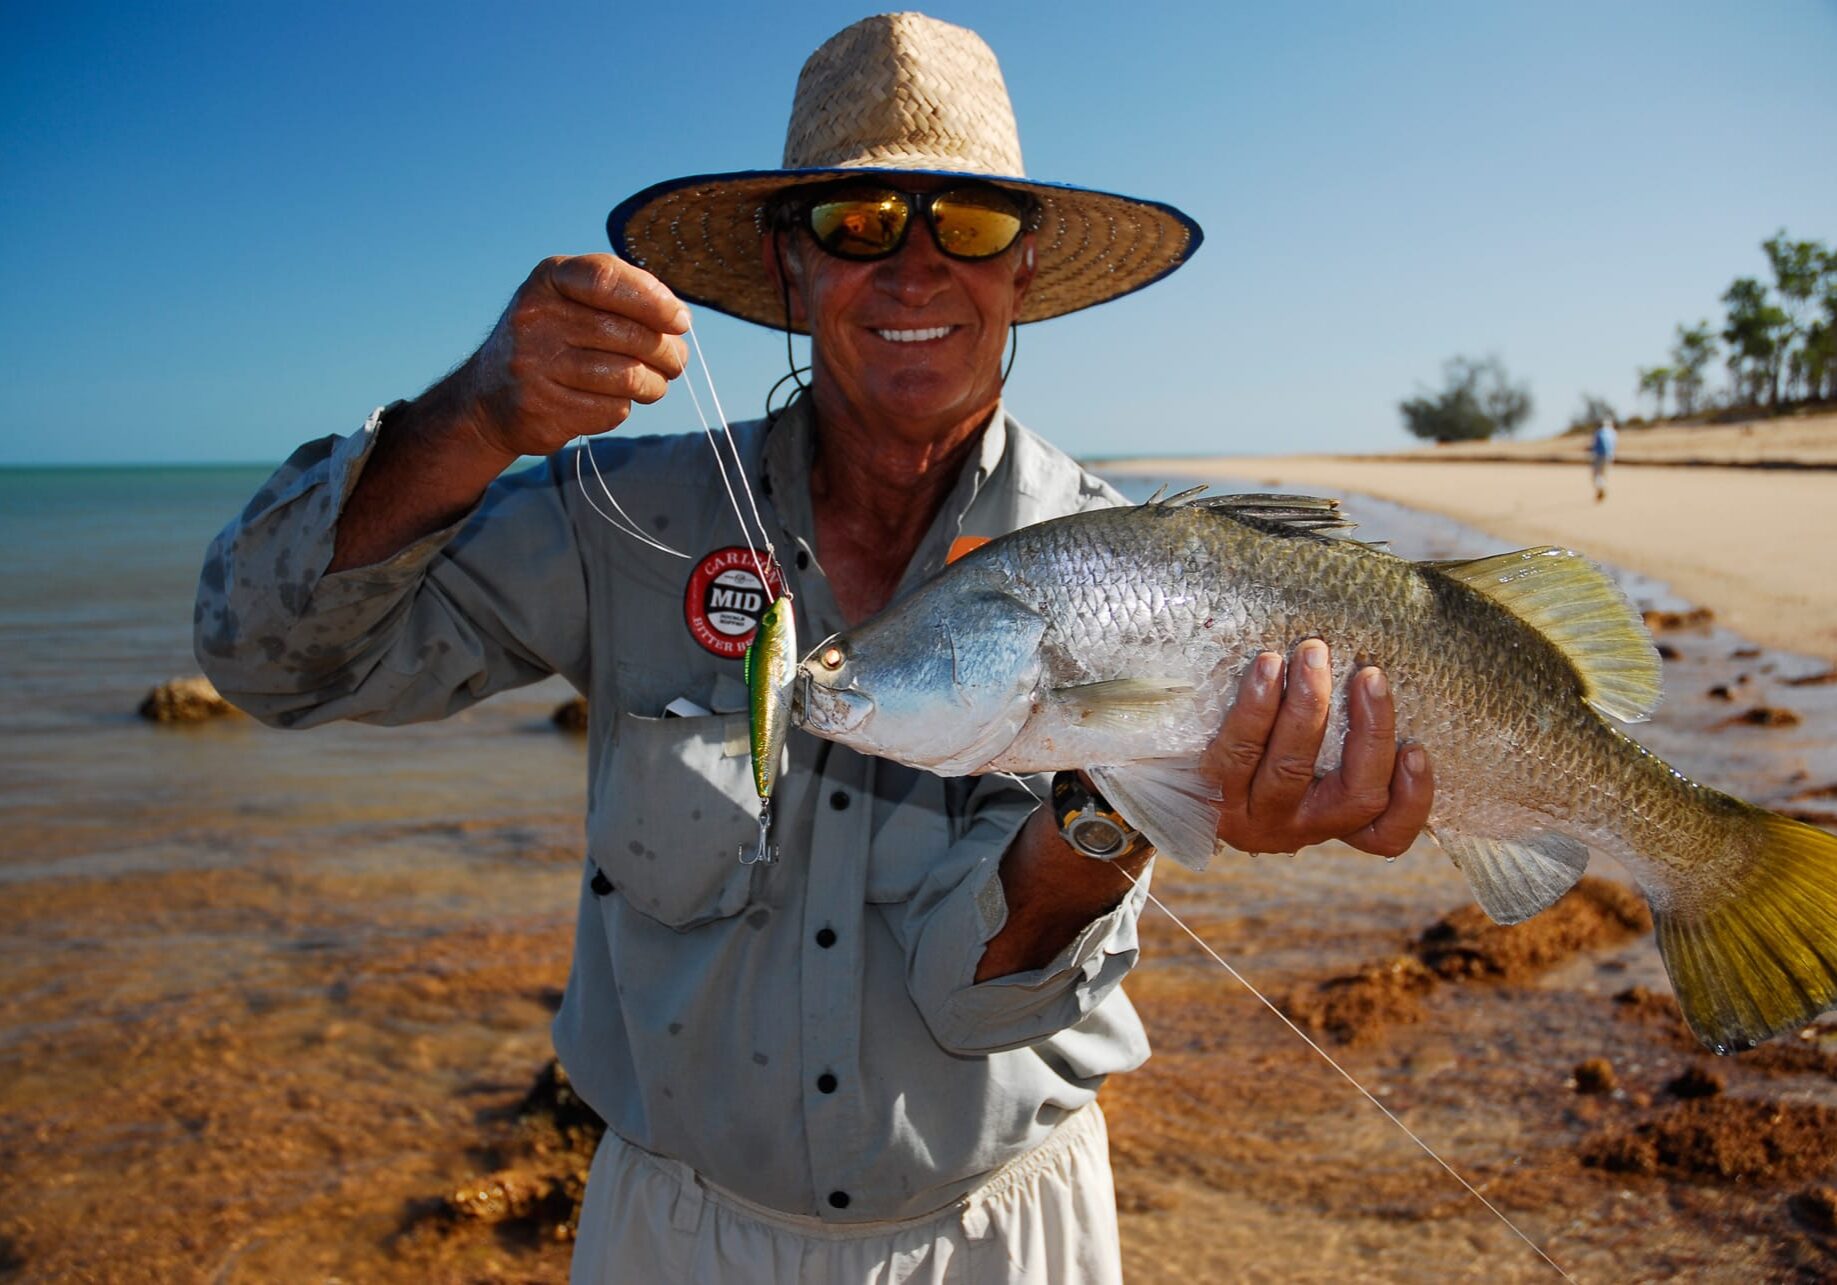 Back in Queensland following the sale of Reidy’s Lures, Jeff scored this lovely salty barra off the beach south of Weipa on one of his favourite lures, a Reidy’s J walker.